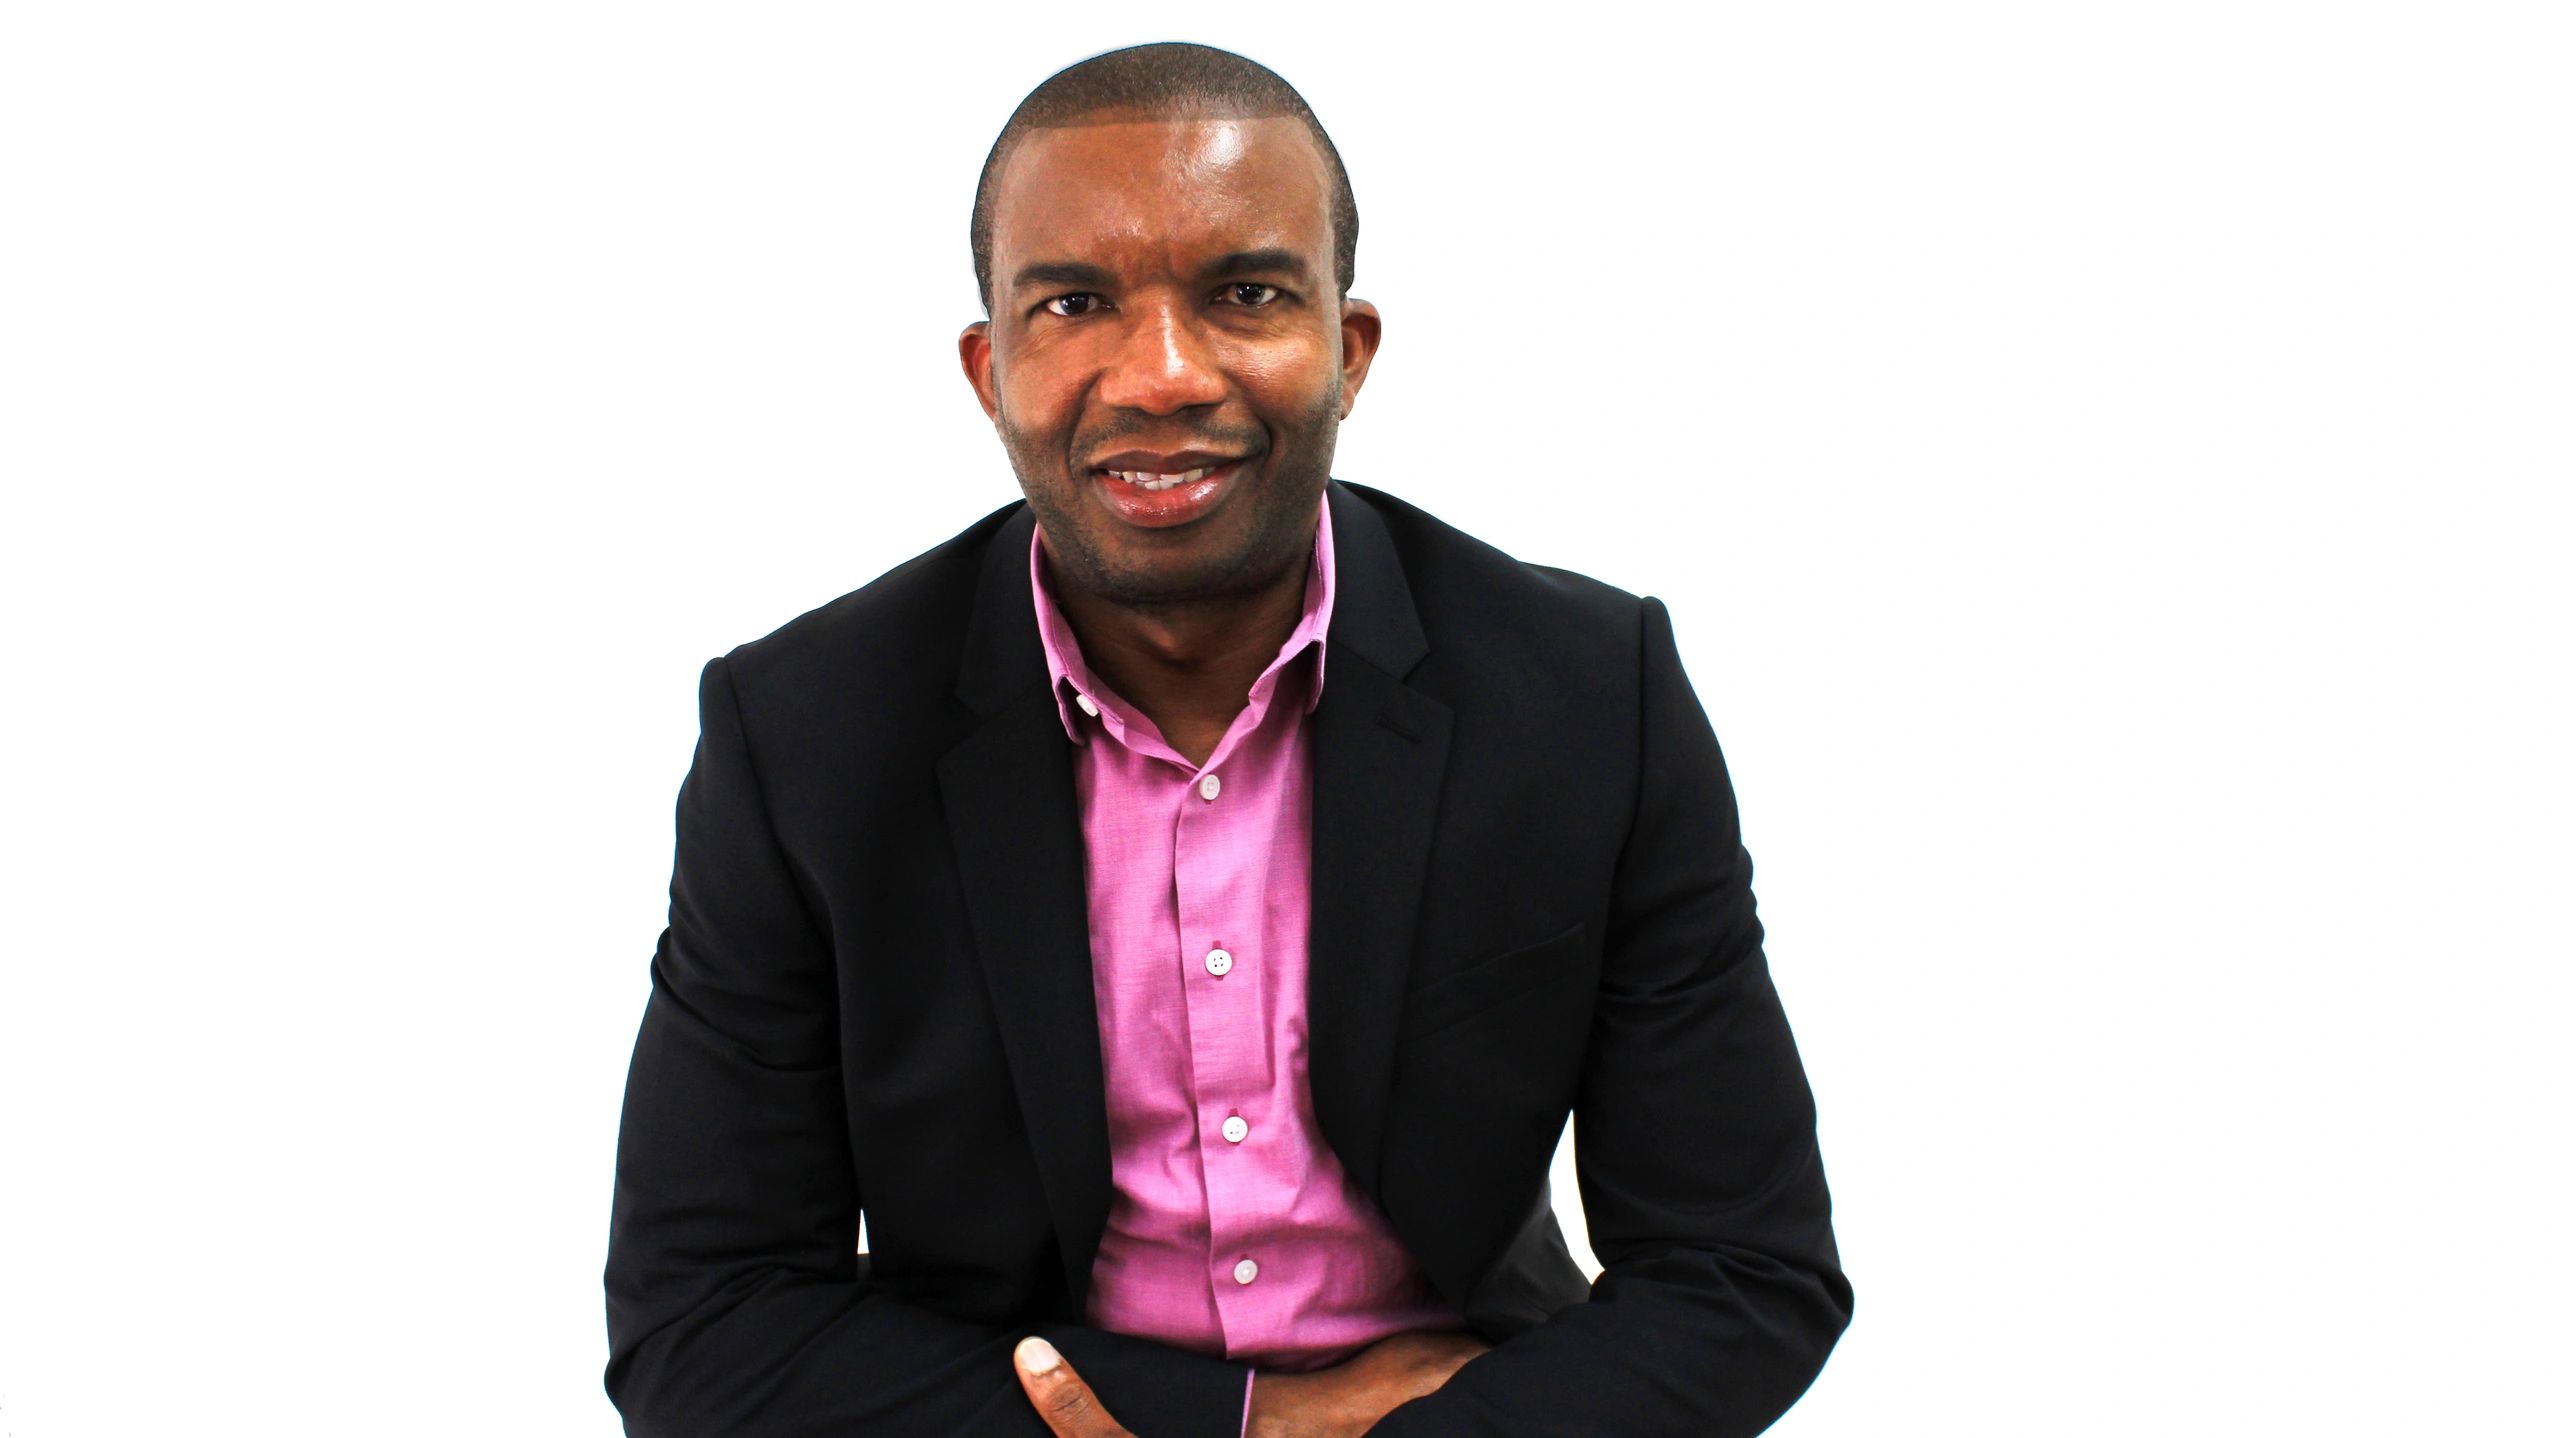 Dr. Ifeanyi Mbadugha Aka Dr. Ify knows there is no such thing as one-size-fits-all cure, so we never